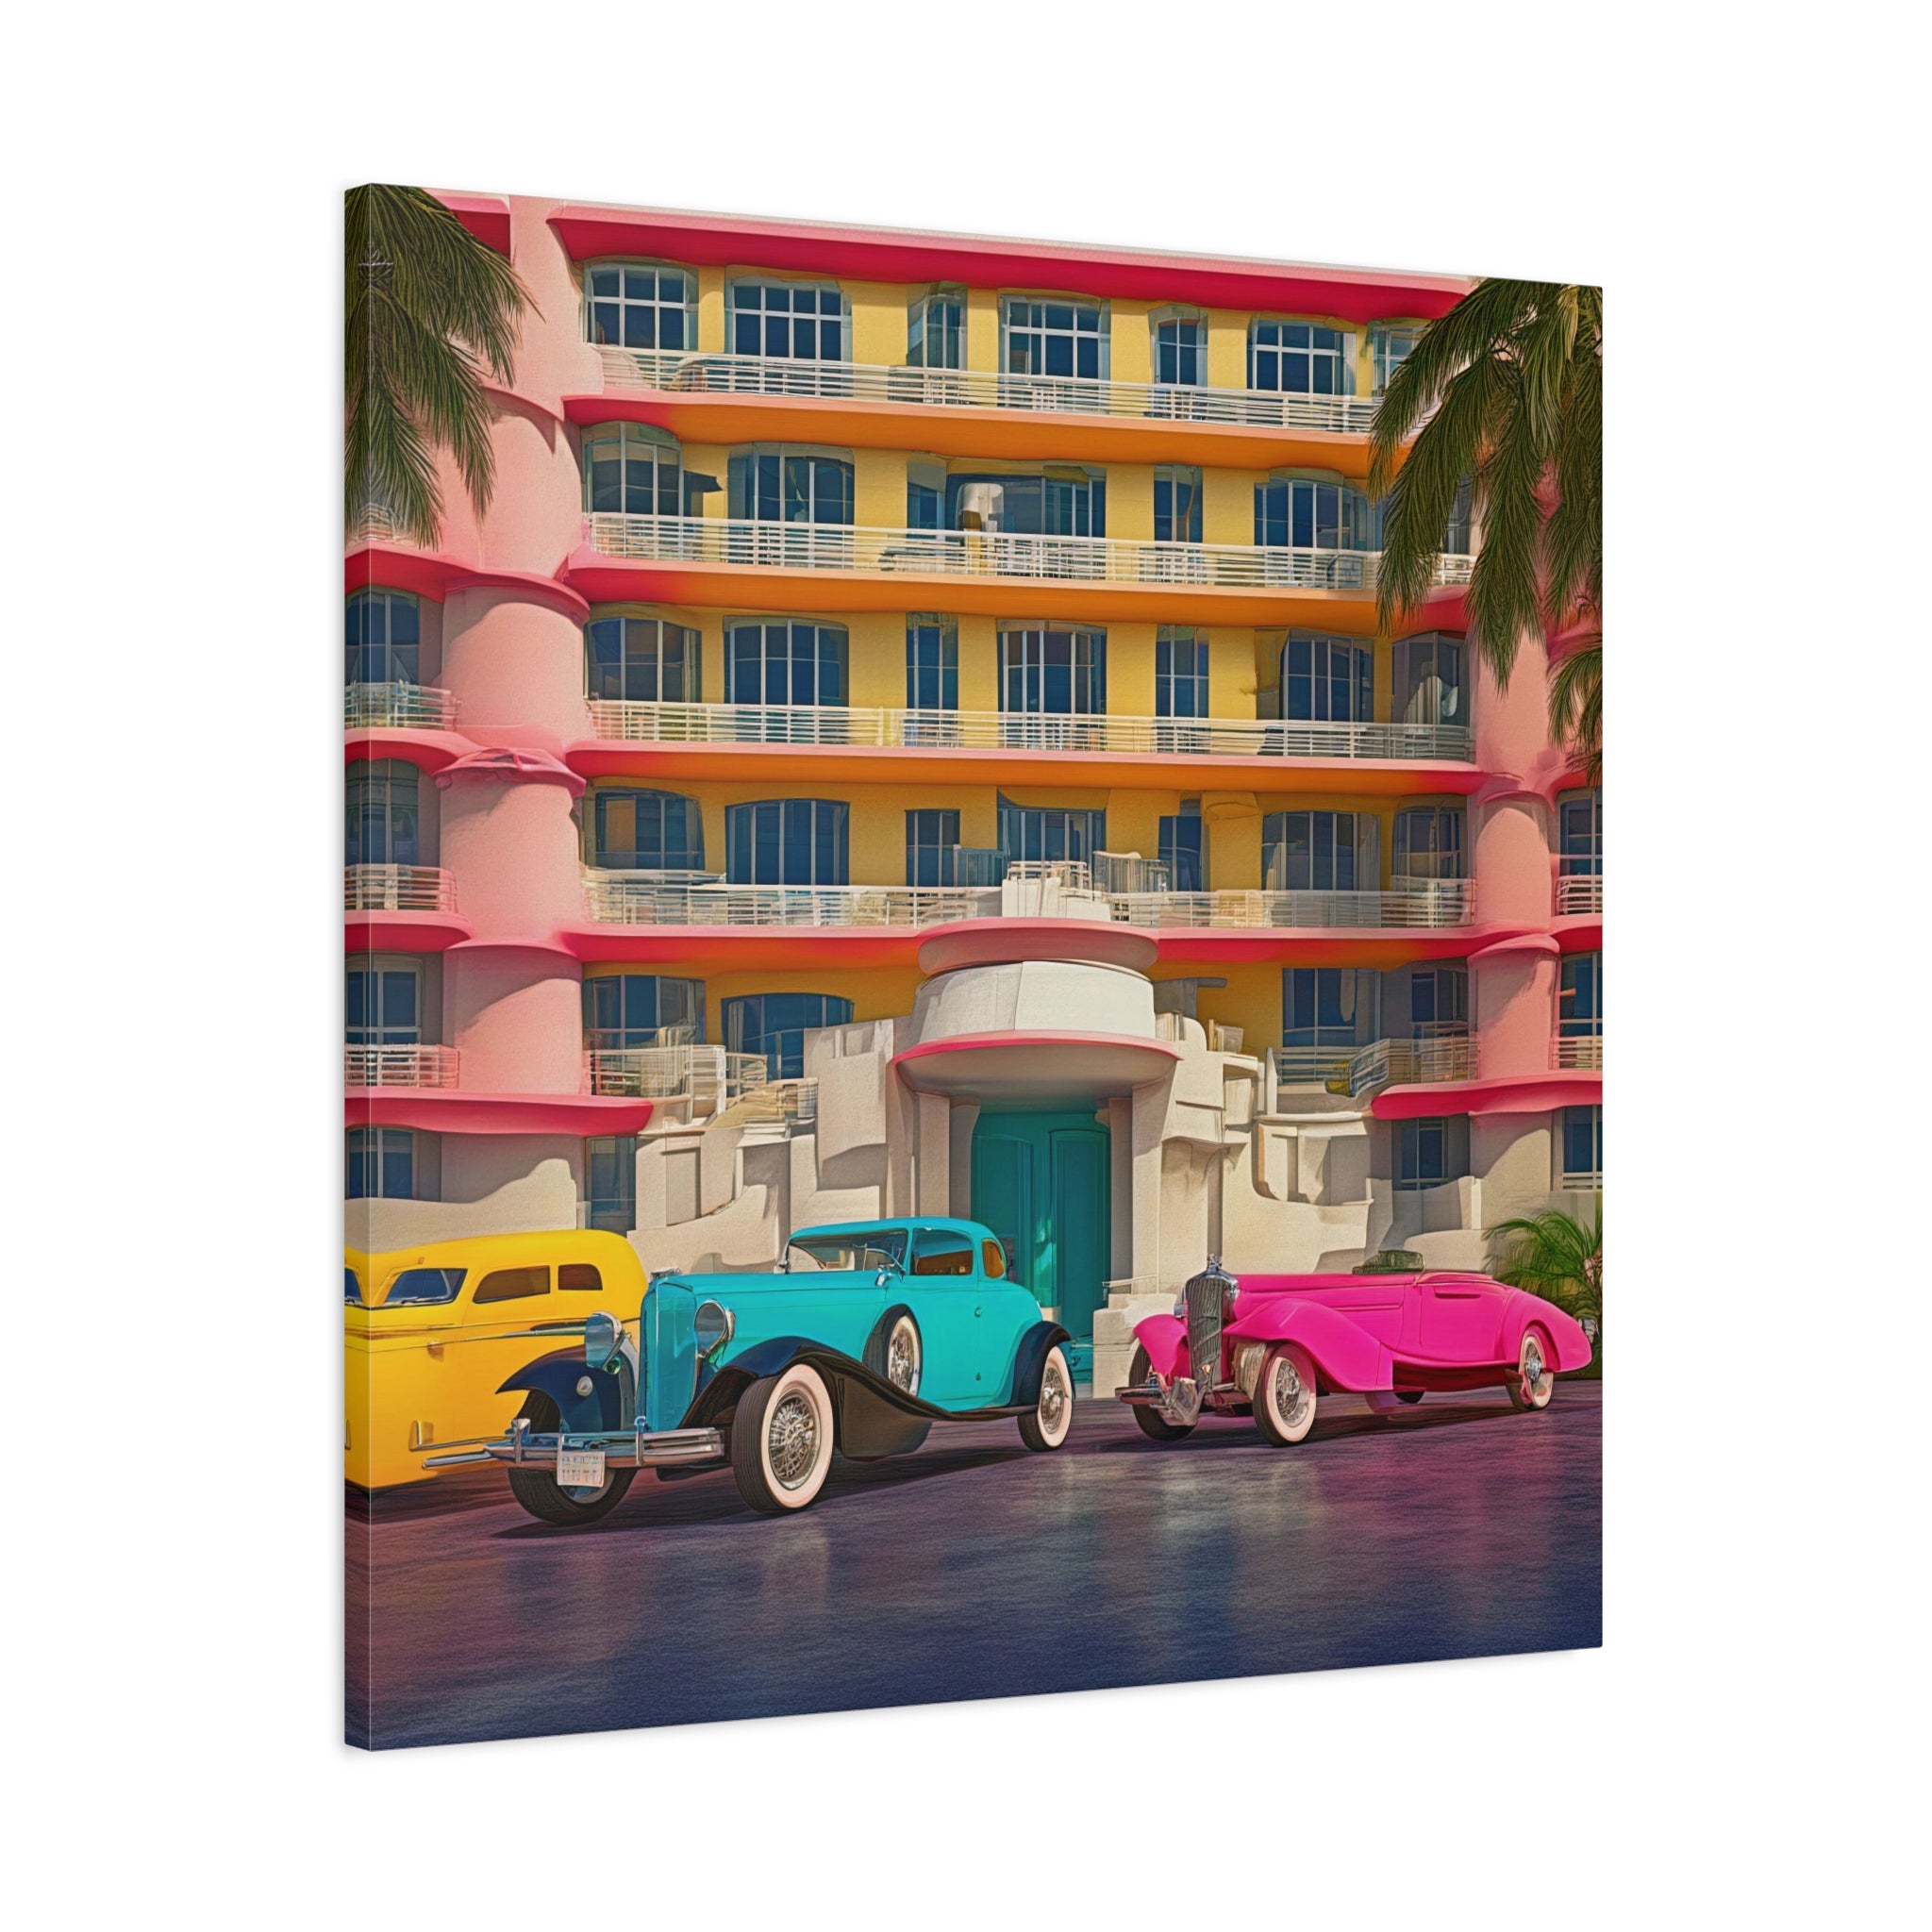 Wall Art I’lll BE RIGHT BACK Canvas Print Art Deco Painting Giclee 32x32 GW Love Beauty Design House Home Office Decor Gift Ready to Hang